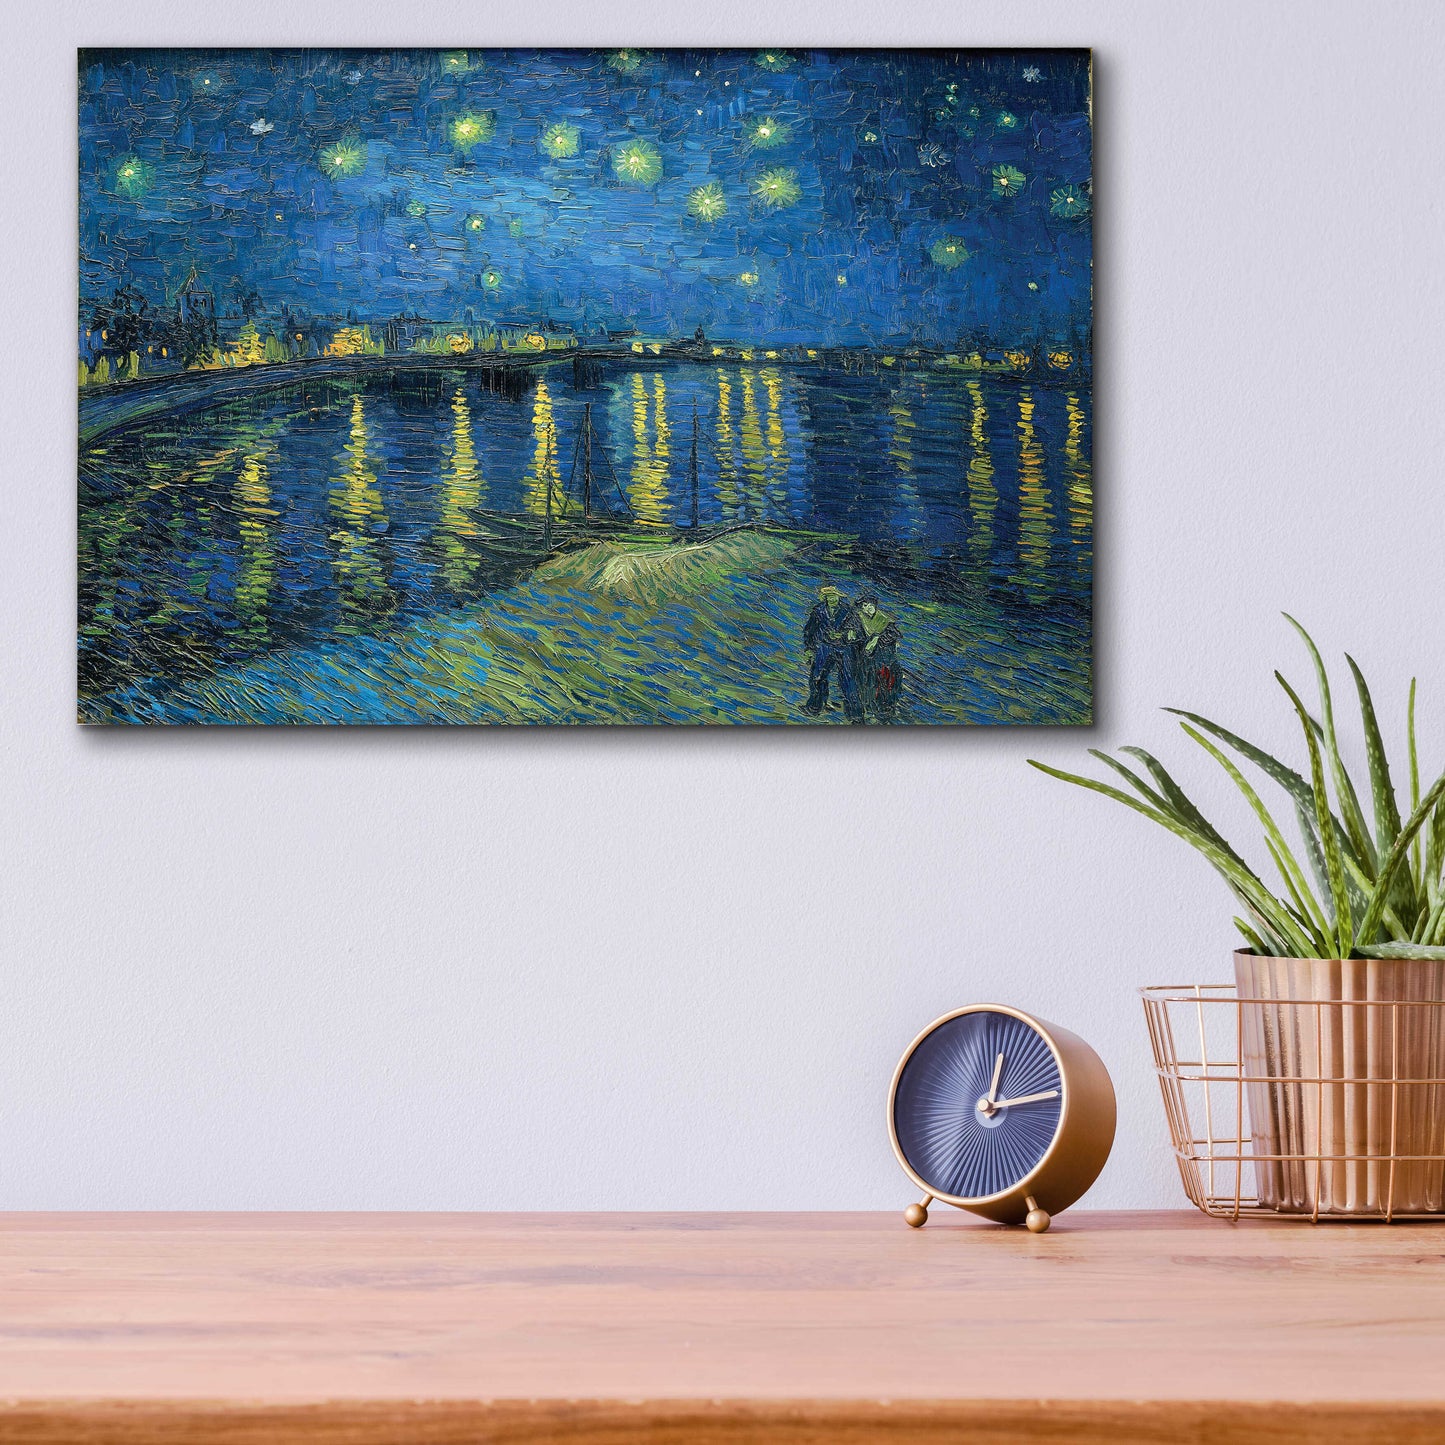 Epic Art 'Starry Night Over the Rhone' by Vincent VanGogh, Acrylic Glass Wall Art,16x12